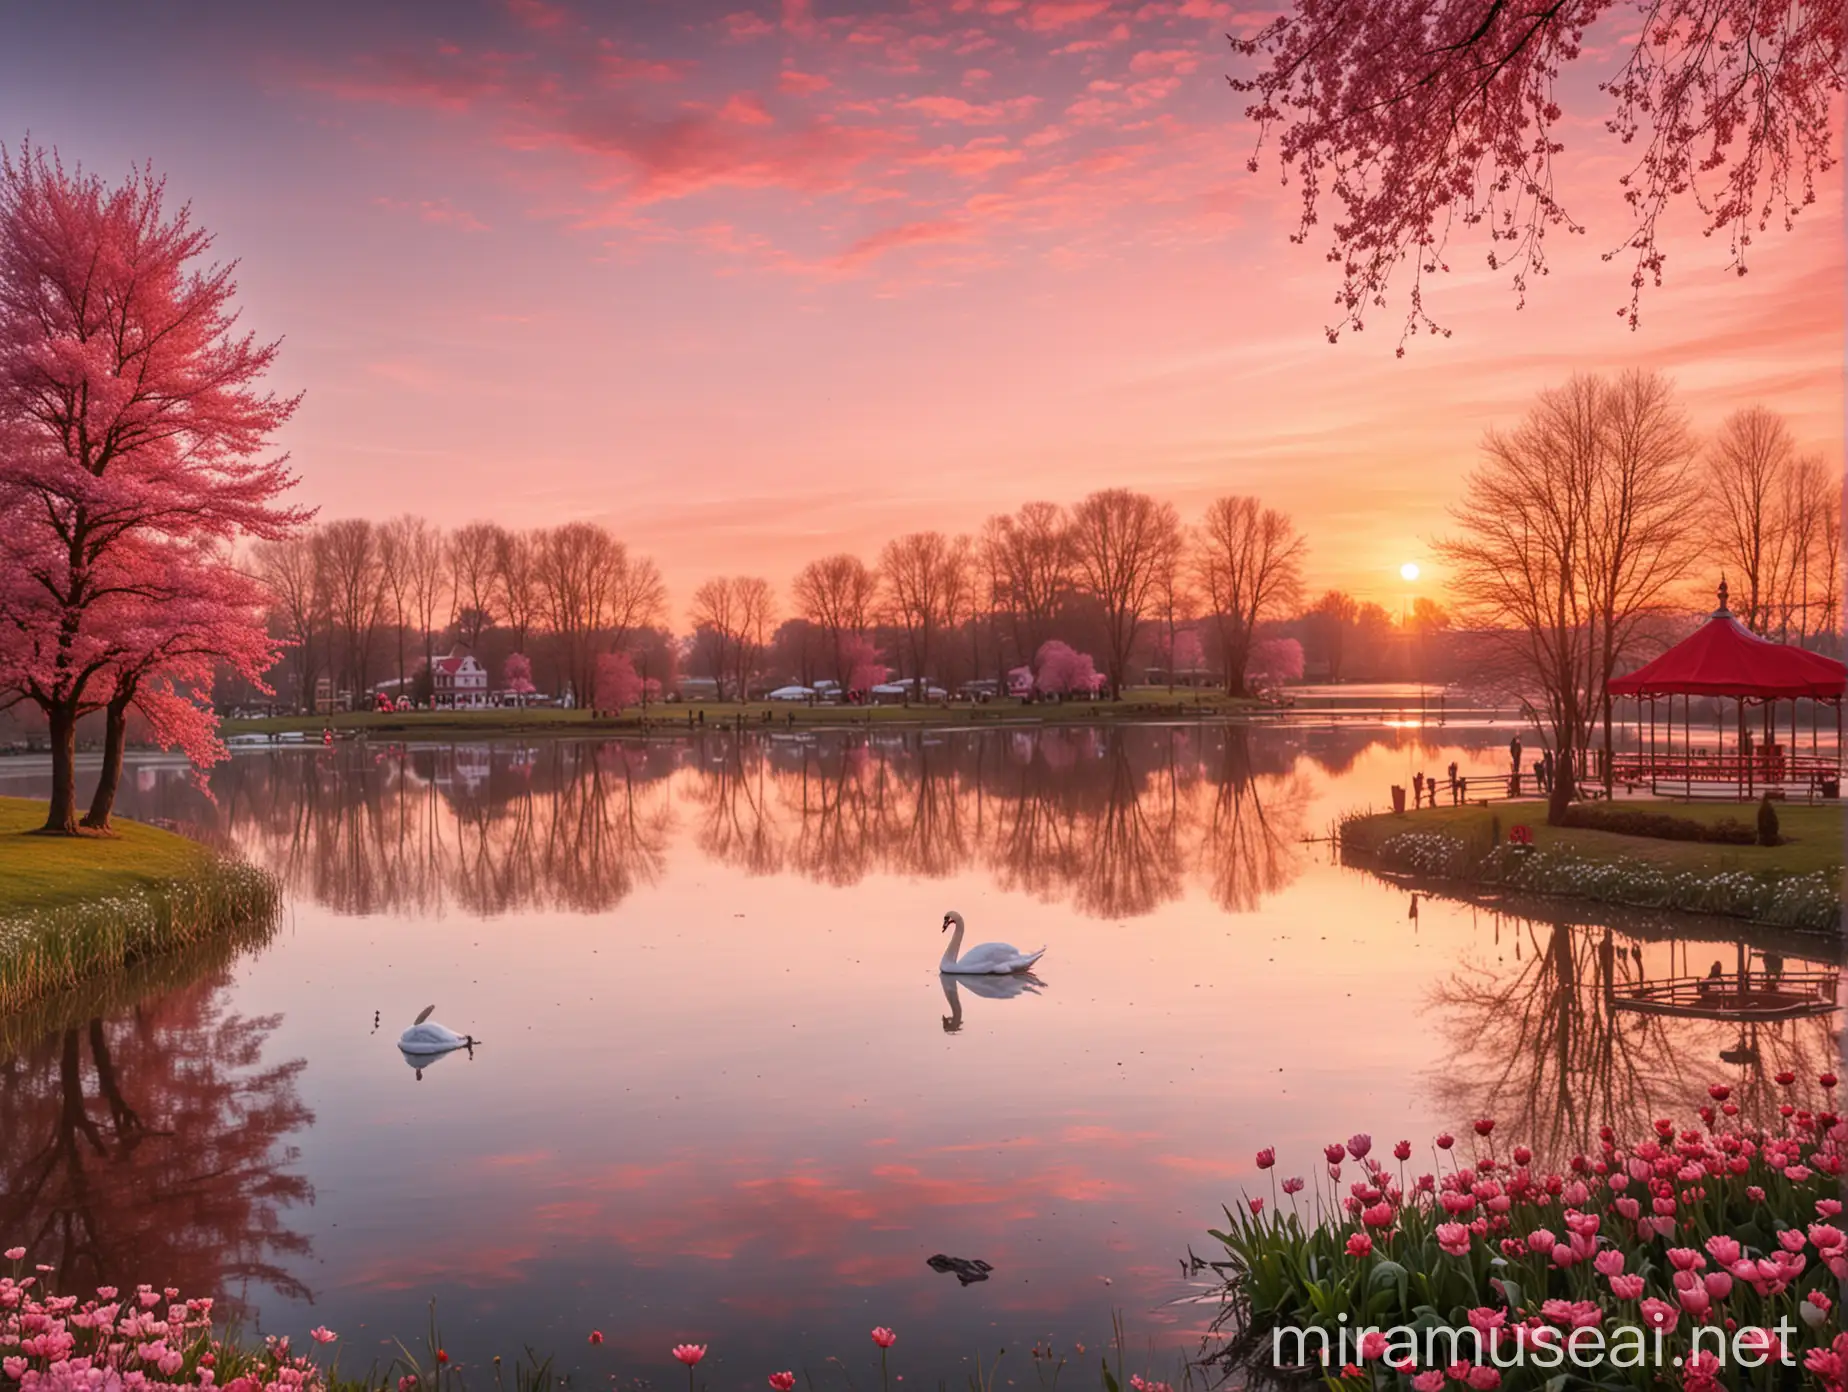 Tranquil Spring Scene with Swan Lake and Ballet Dancer at Sunset